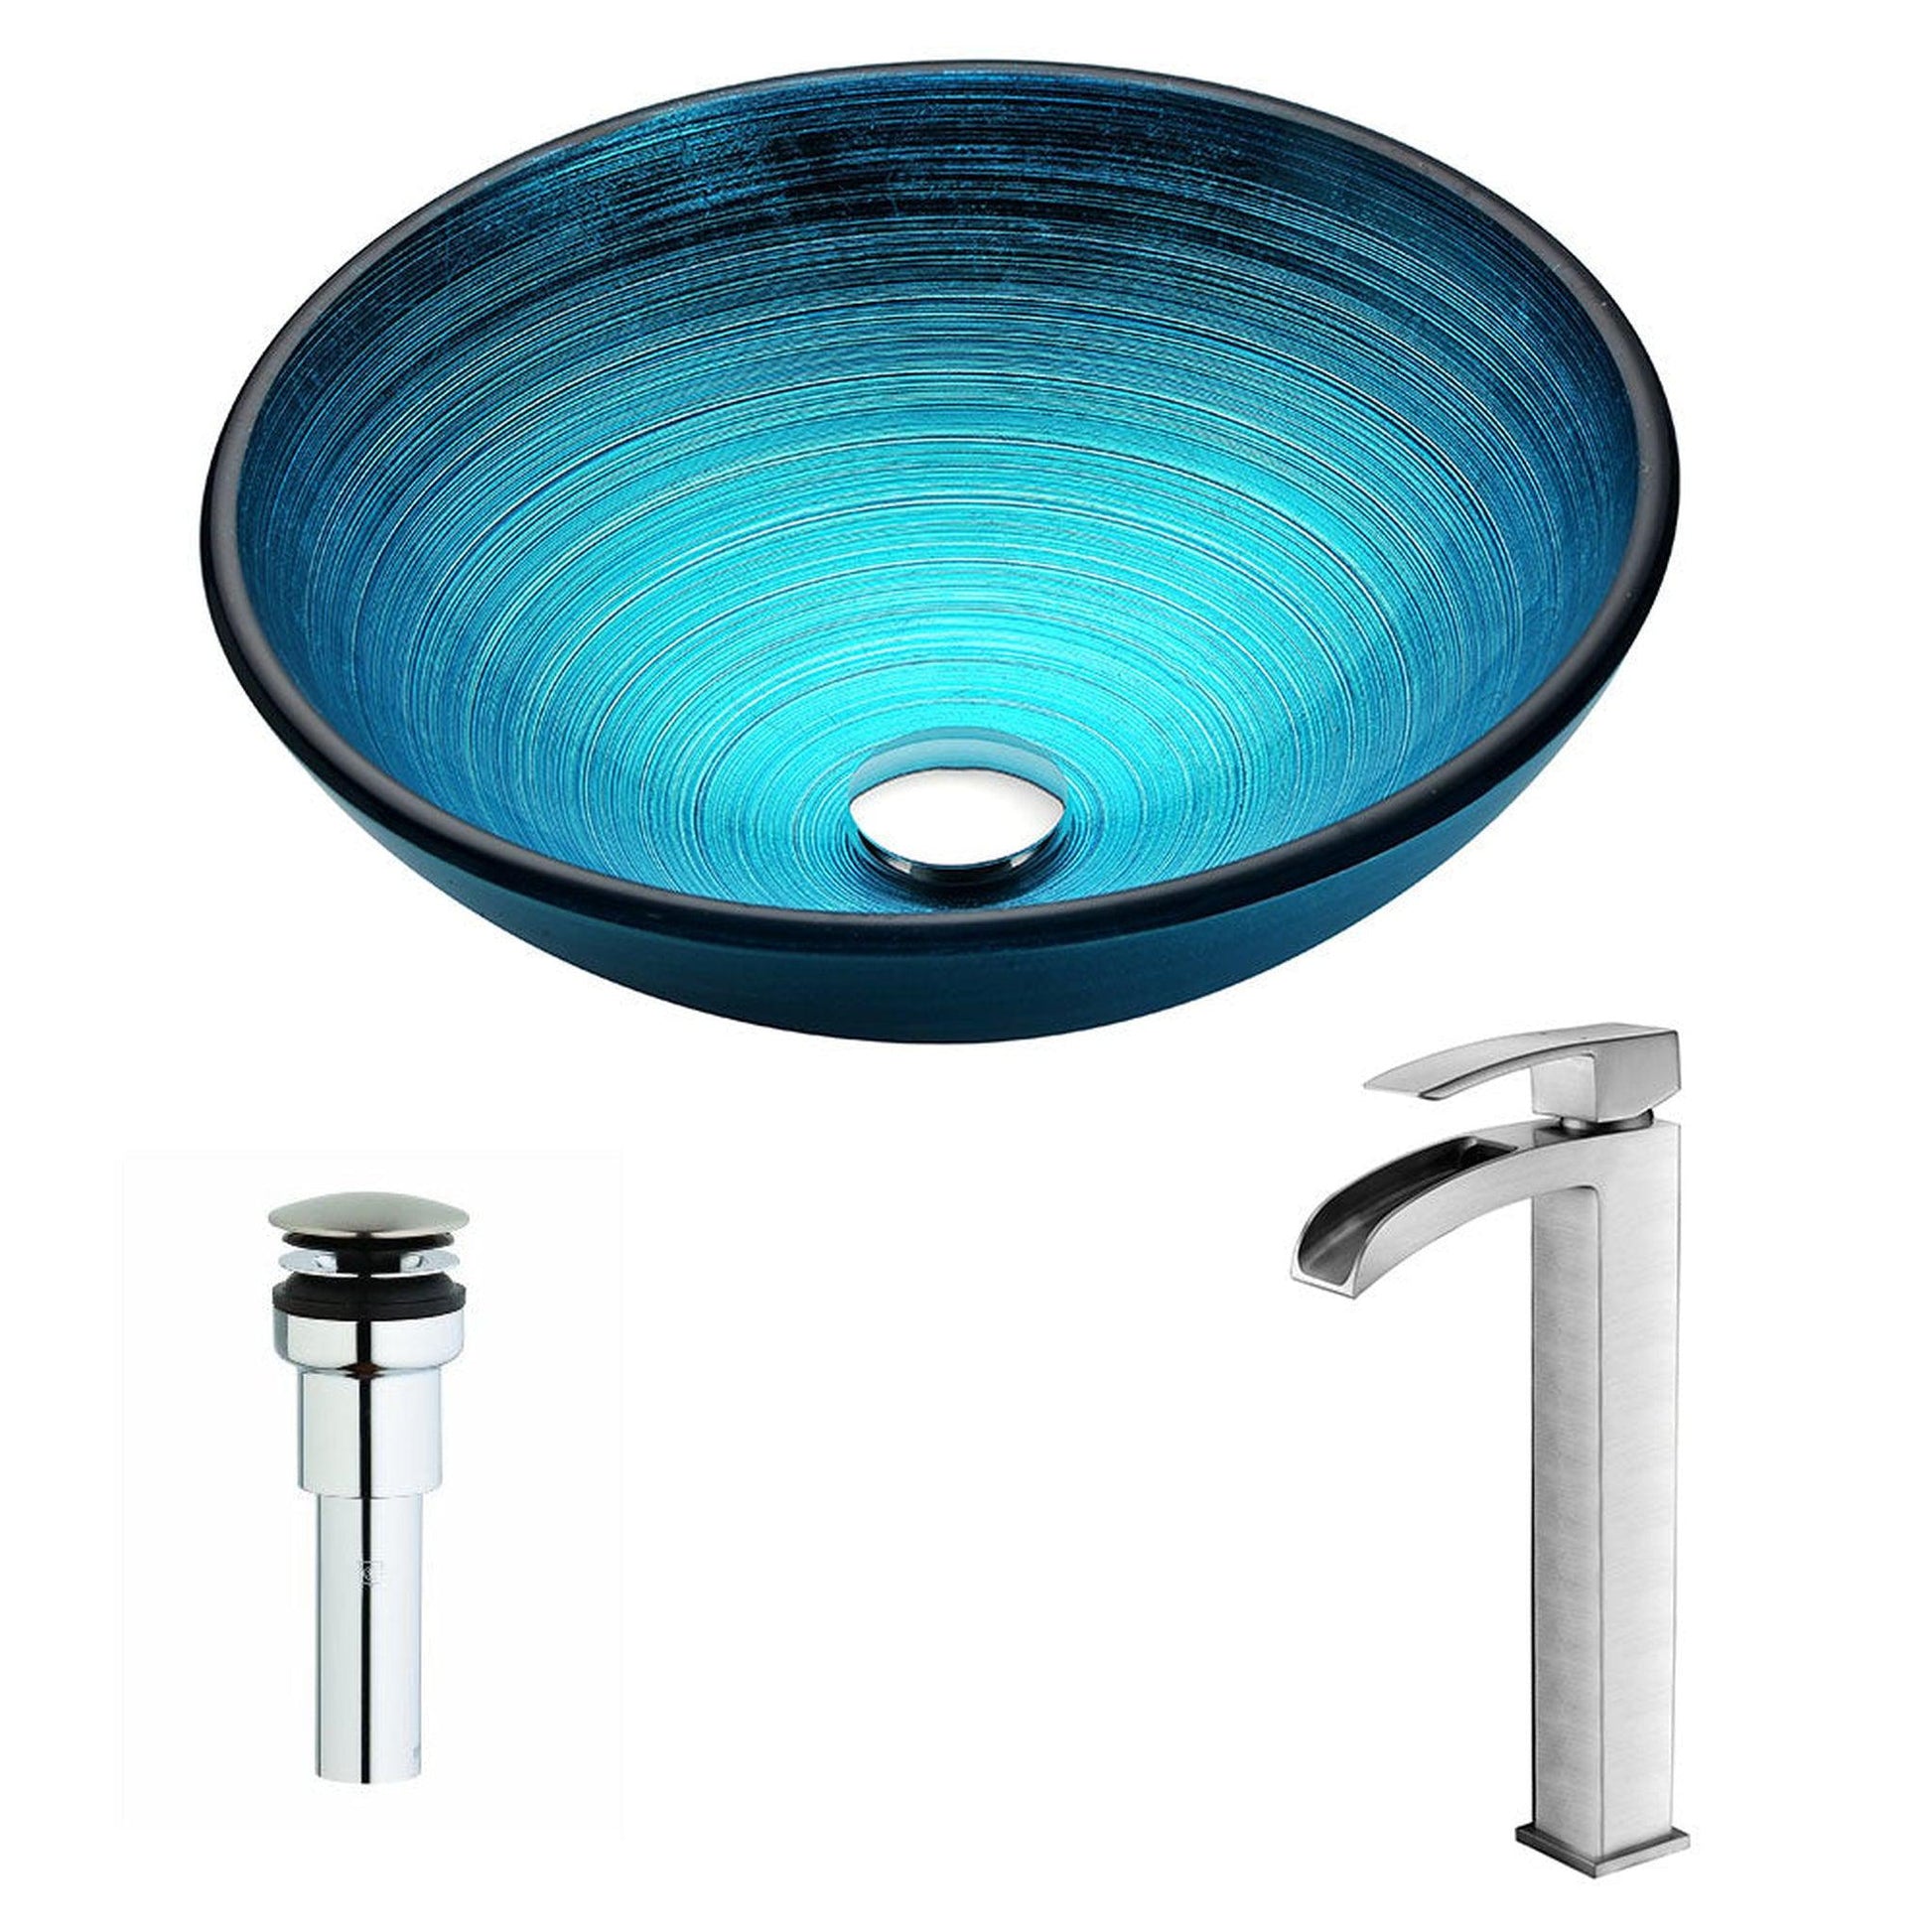 ANZZI Enti Series 17" x 17" Round Lustrous Blue Deco-Glass Vessel Sink With Chrome Pop-Up Drain and Brushed Nickel Key Faucet